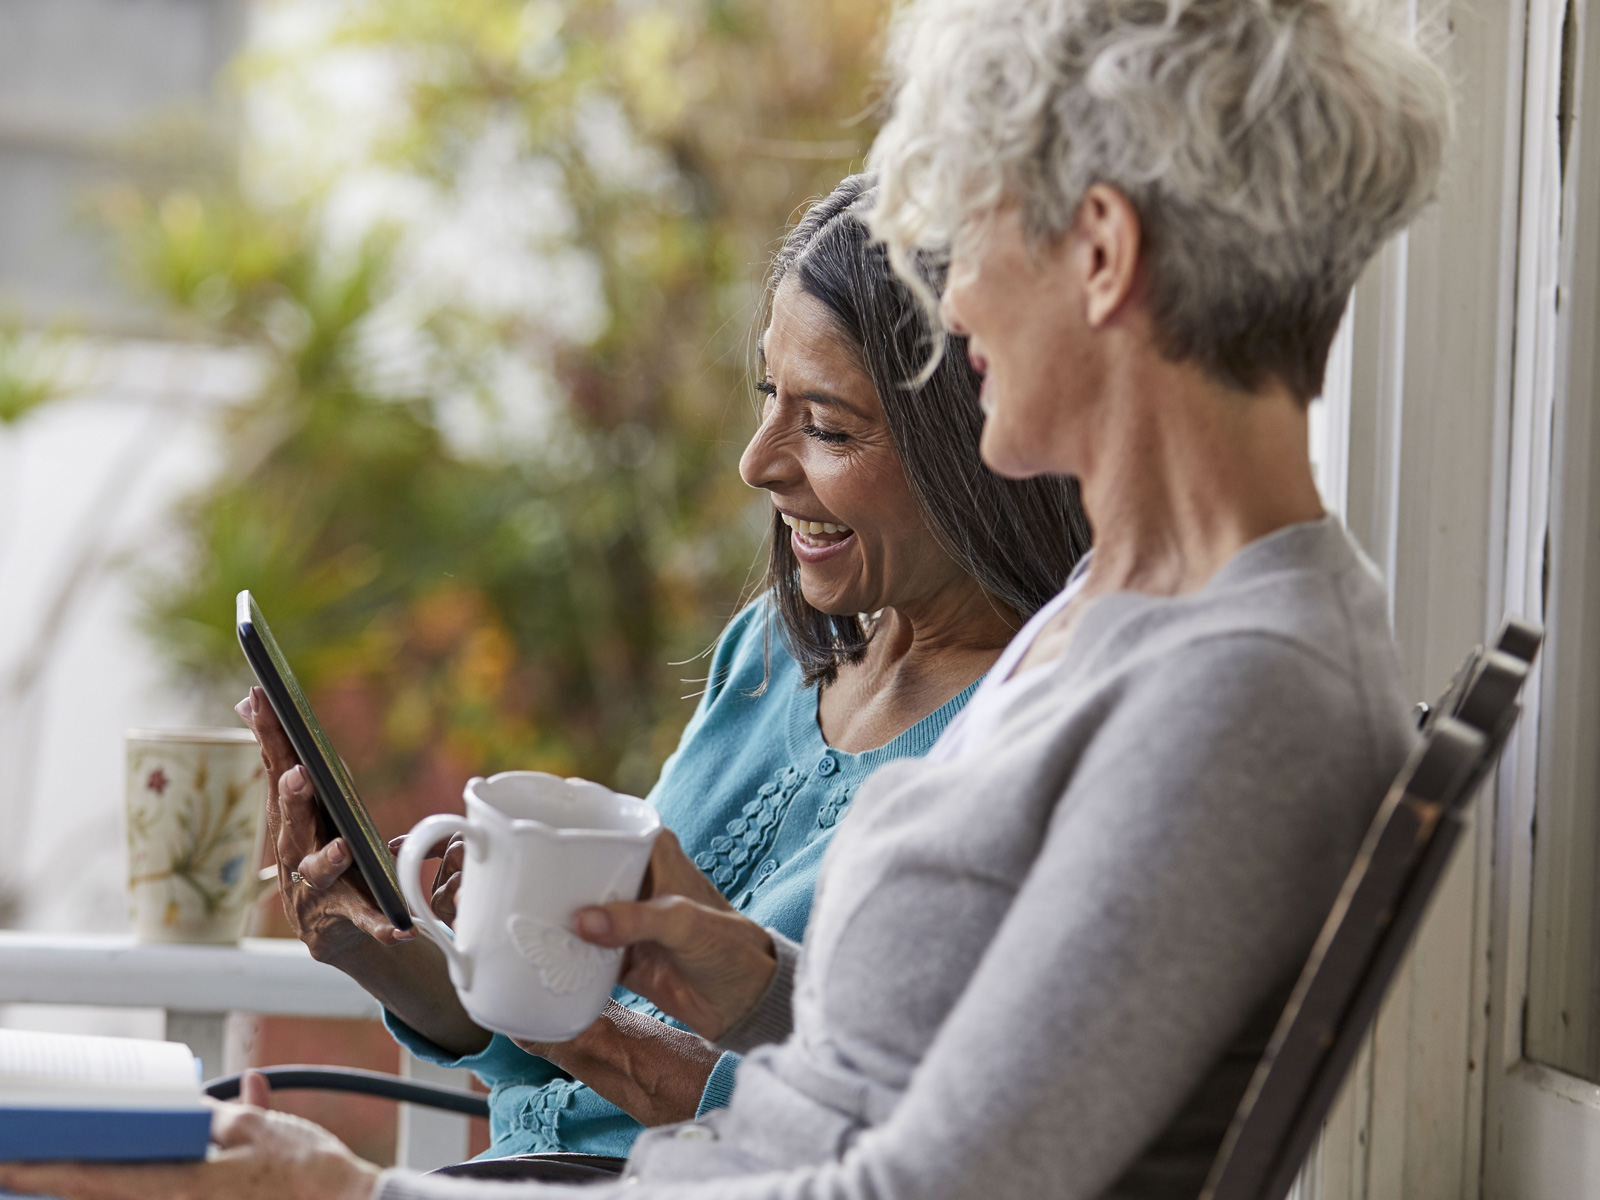 Two laughing women gaze into a tablet as they sit outside and enjoy their morning coffee.